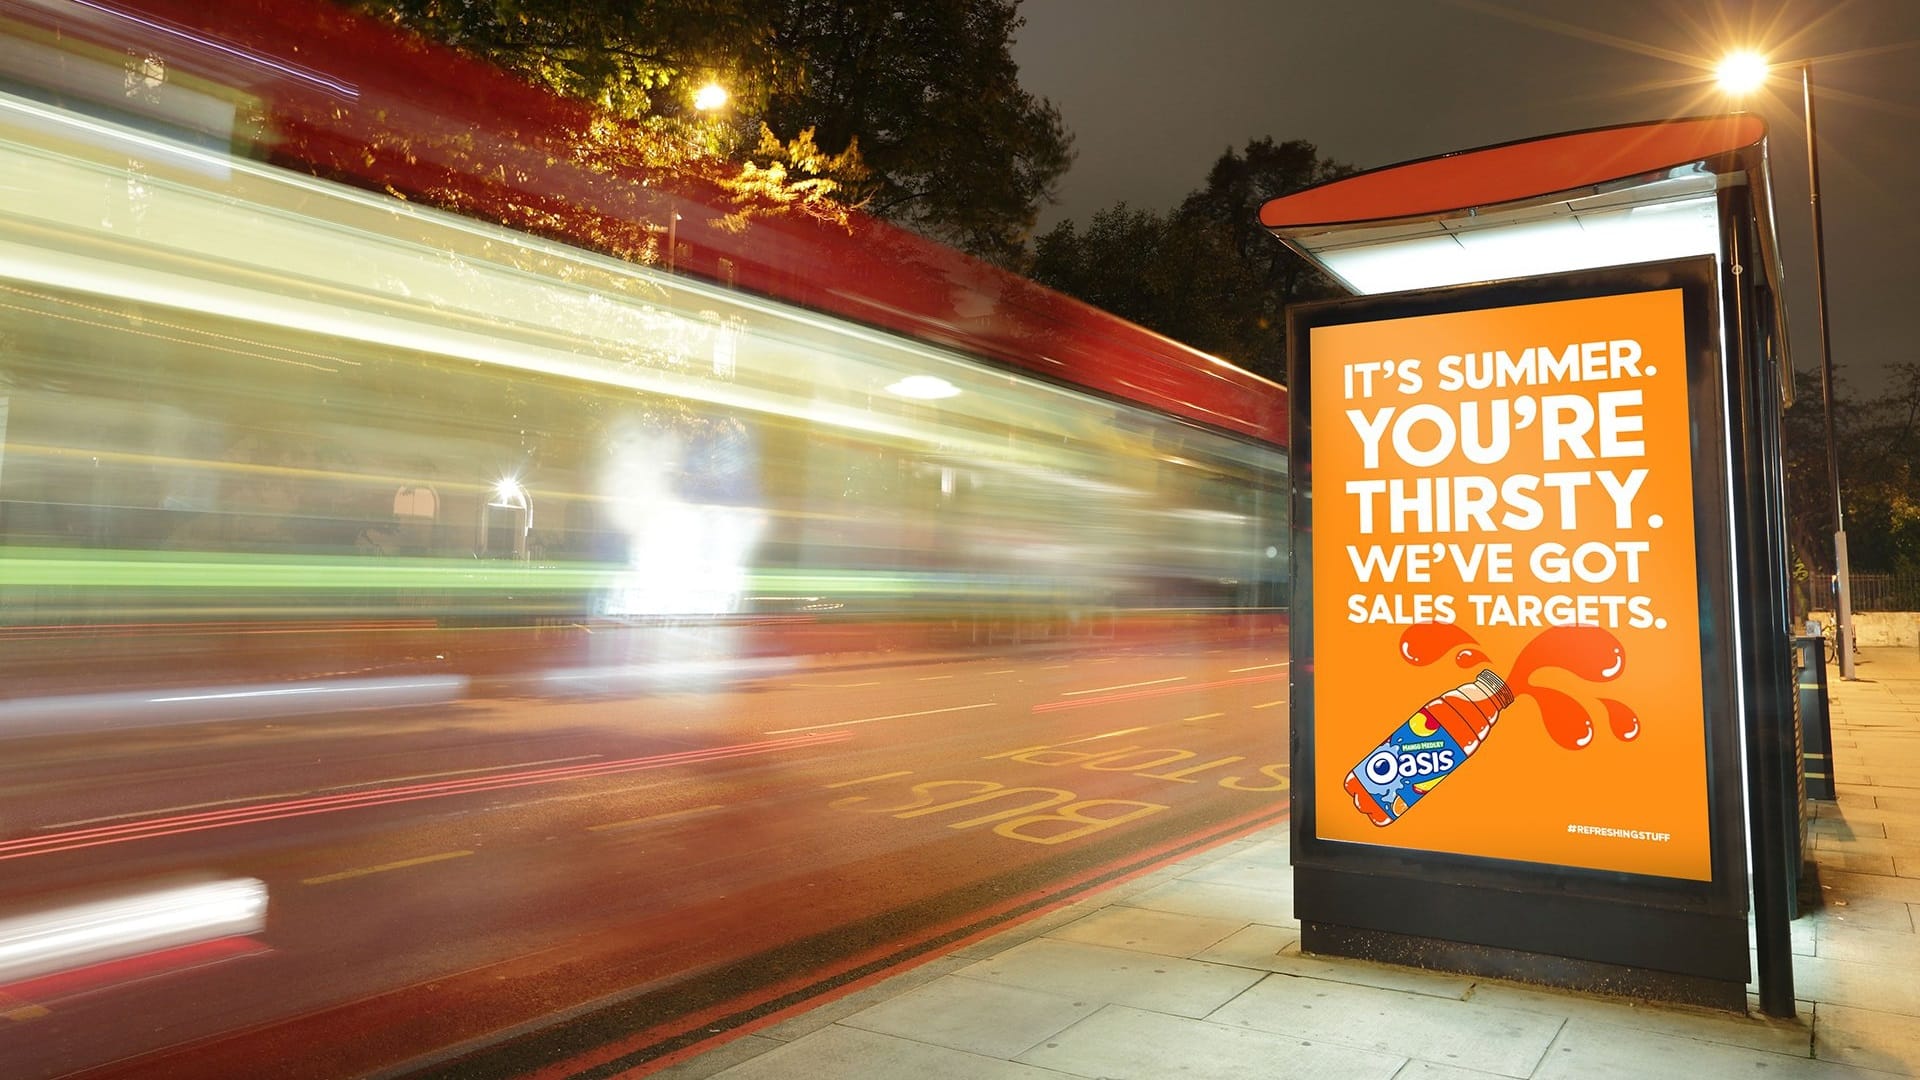 14 Examples of Creative Copywriting in Advertising